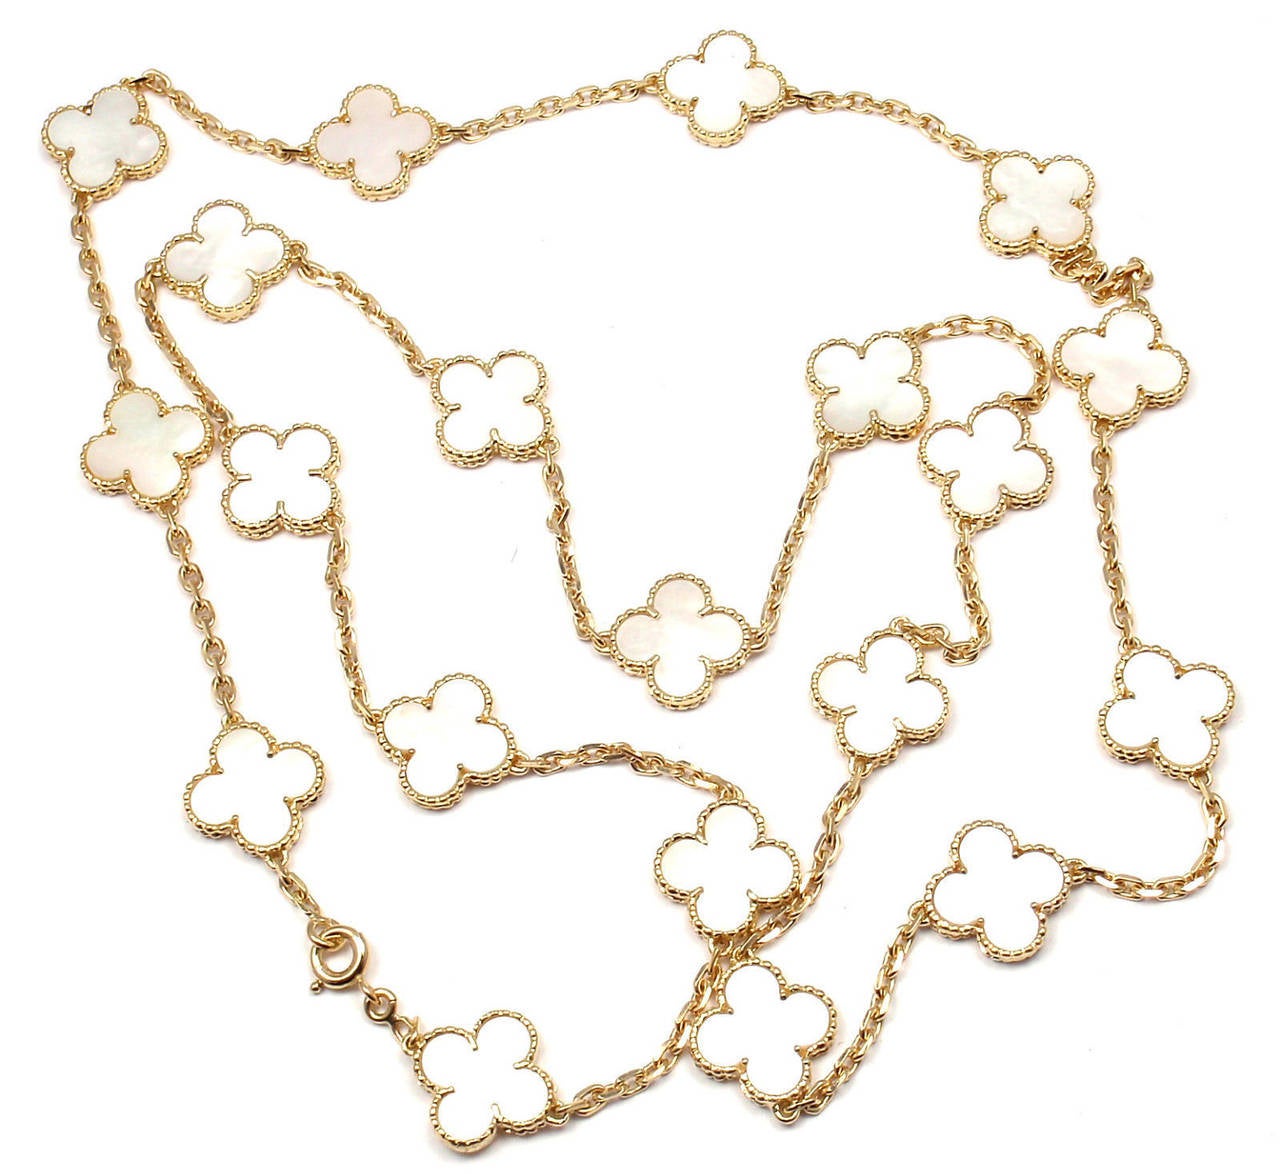 18k Yellow Gold Alhambra 20 Motifs Coral Necklace by Van Cleef & Arpels. 
With 20 motifs of mother of pearl alhambra stones 15mm each
This is an antique mother of pearl alhambra necklace from 1970's.

Details: 
Length:  31.5